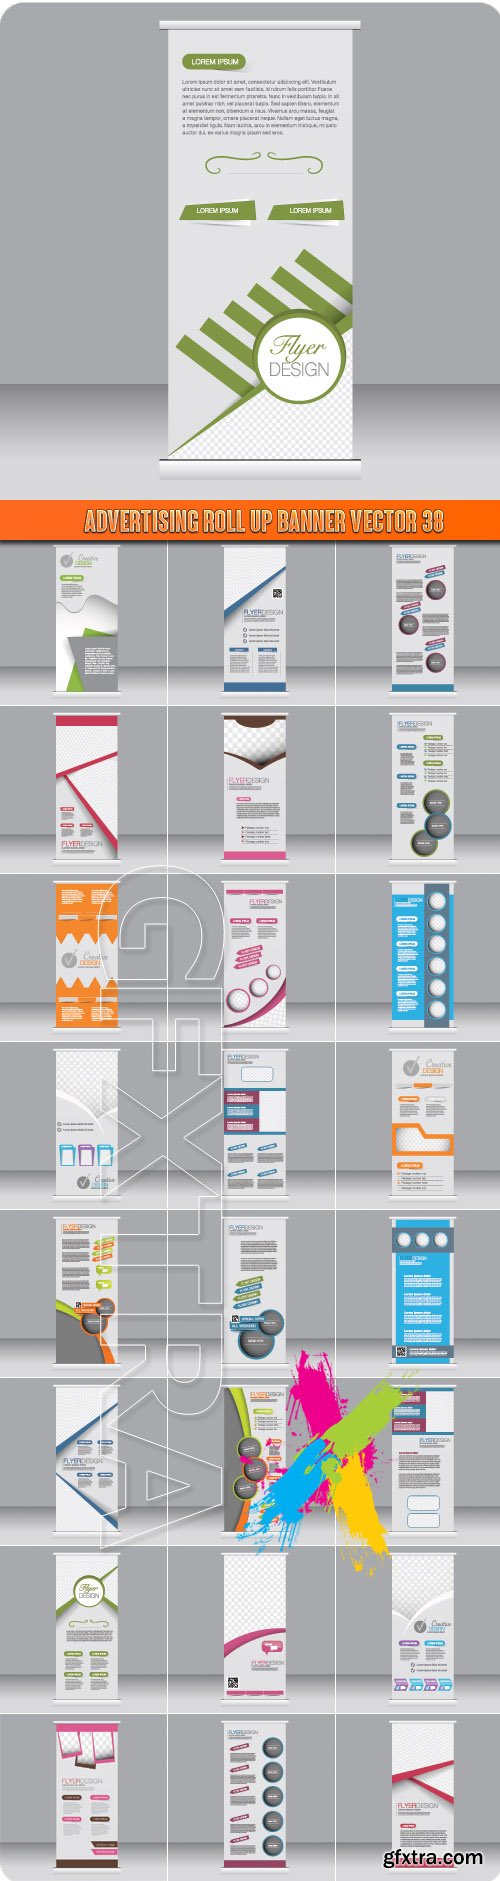 Advertising Roll up banner vector 38